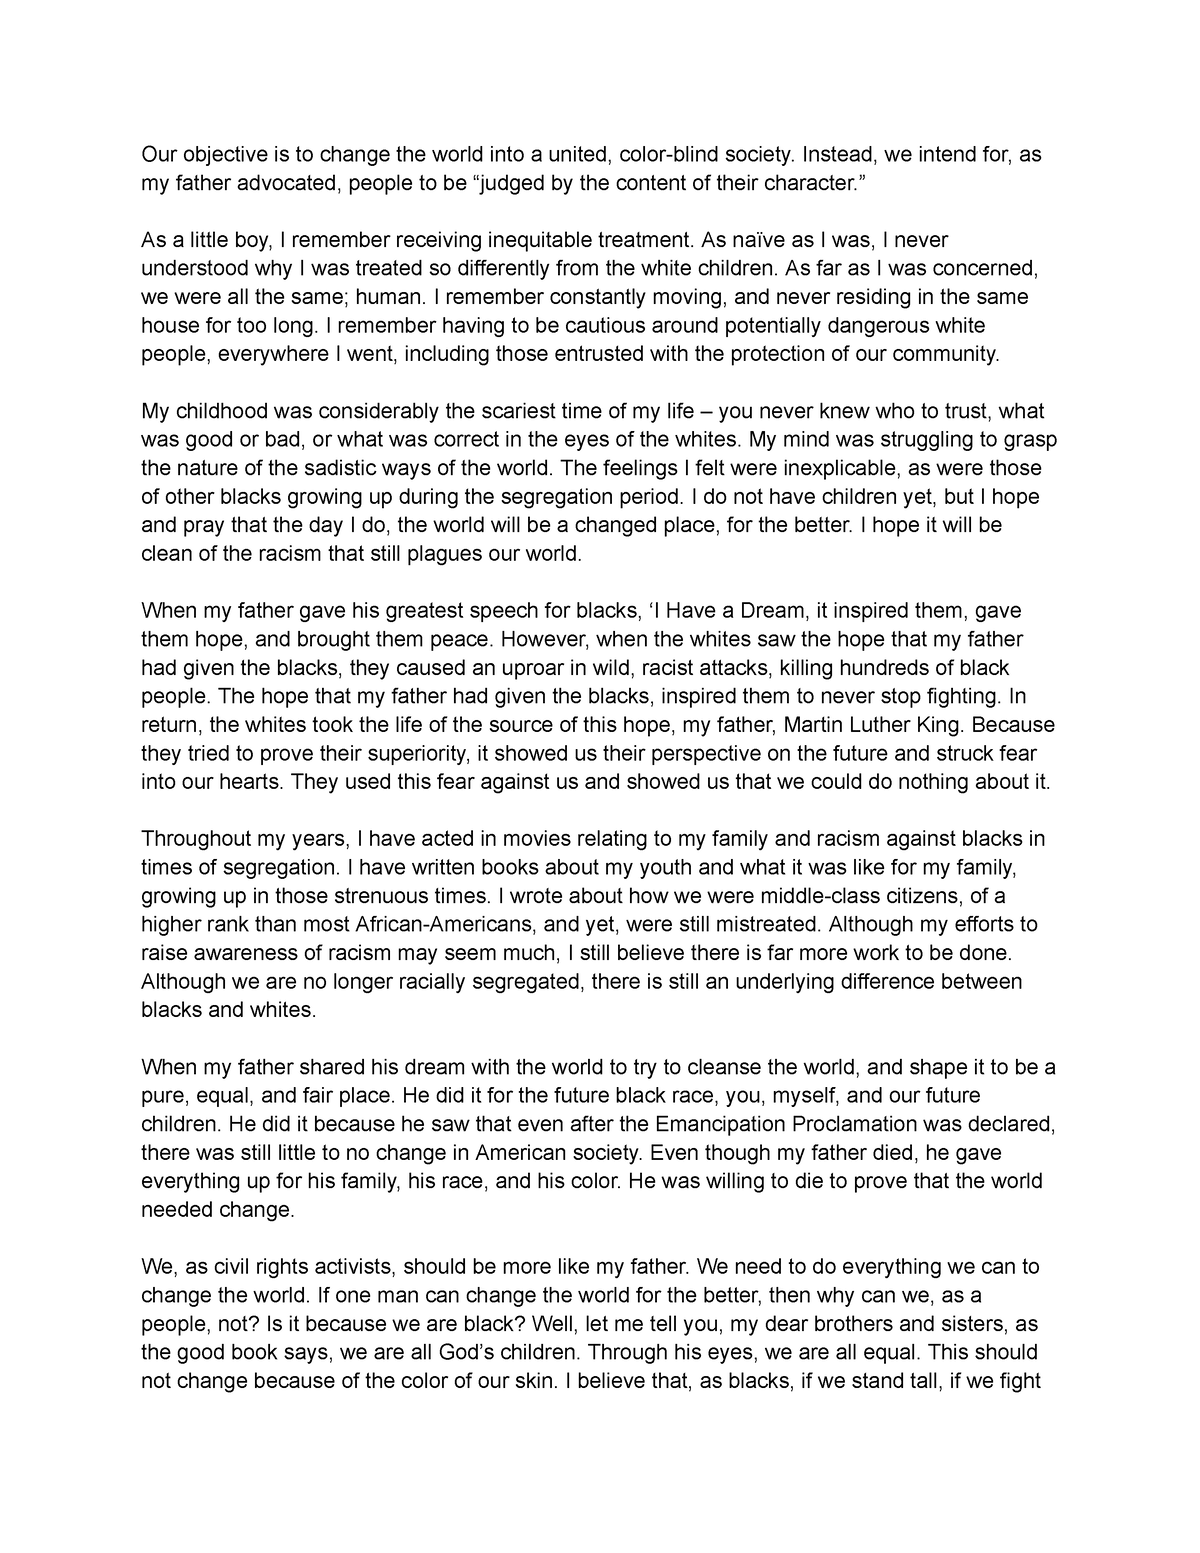 changing the world essay